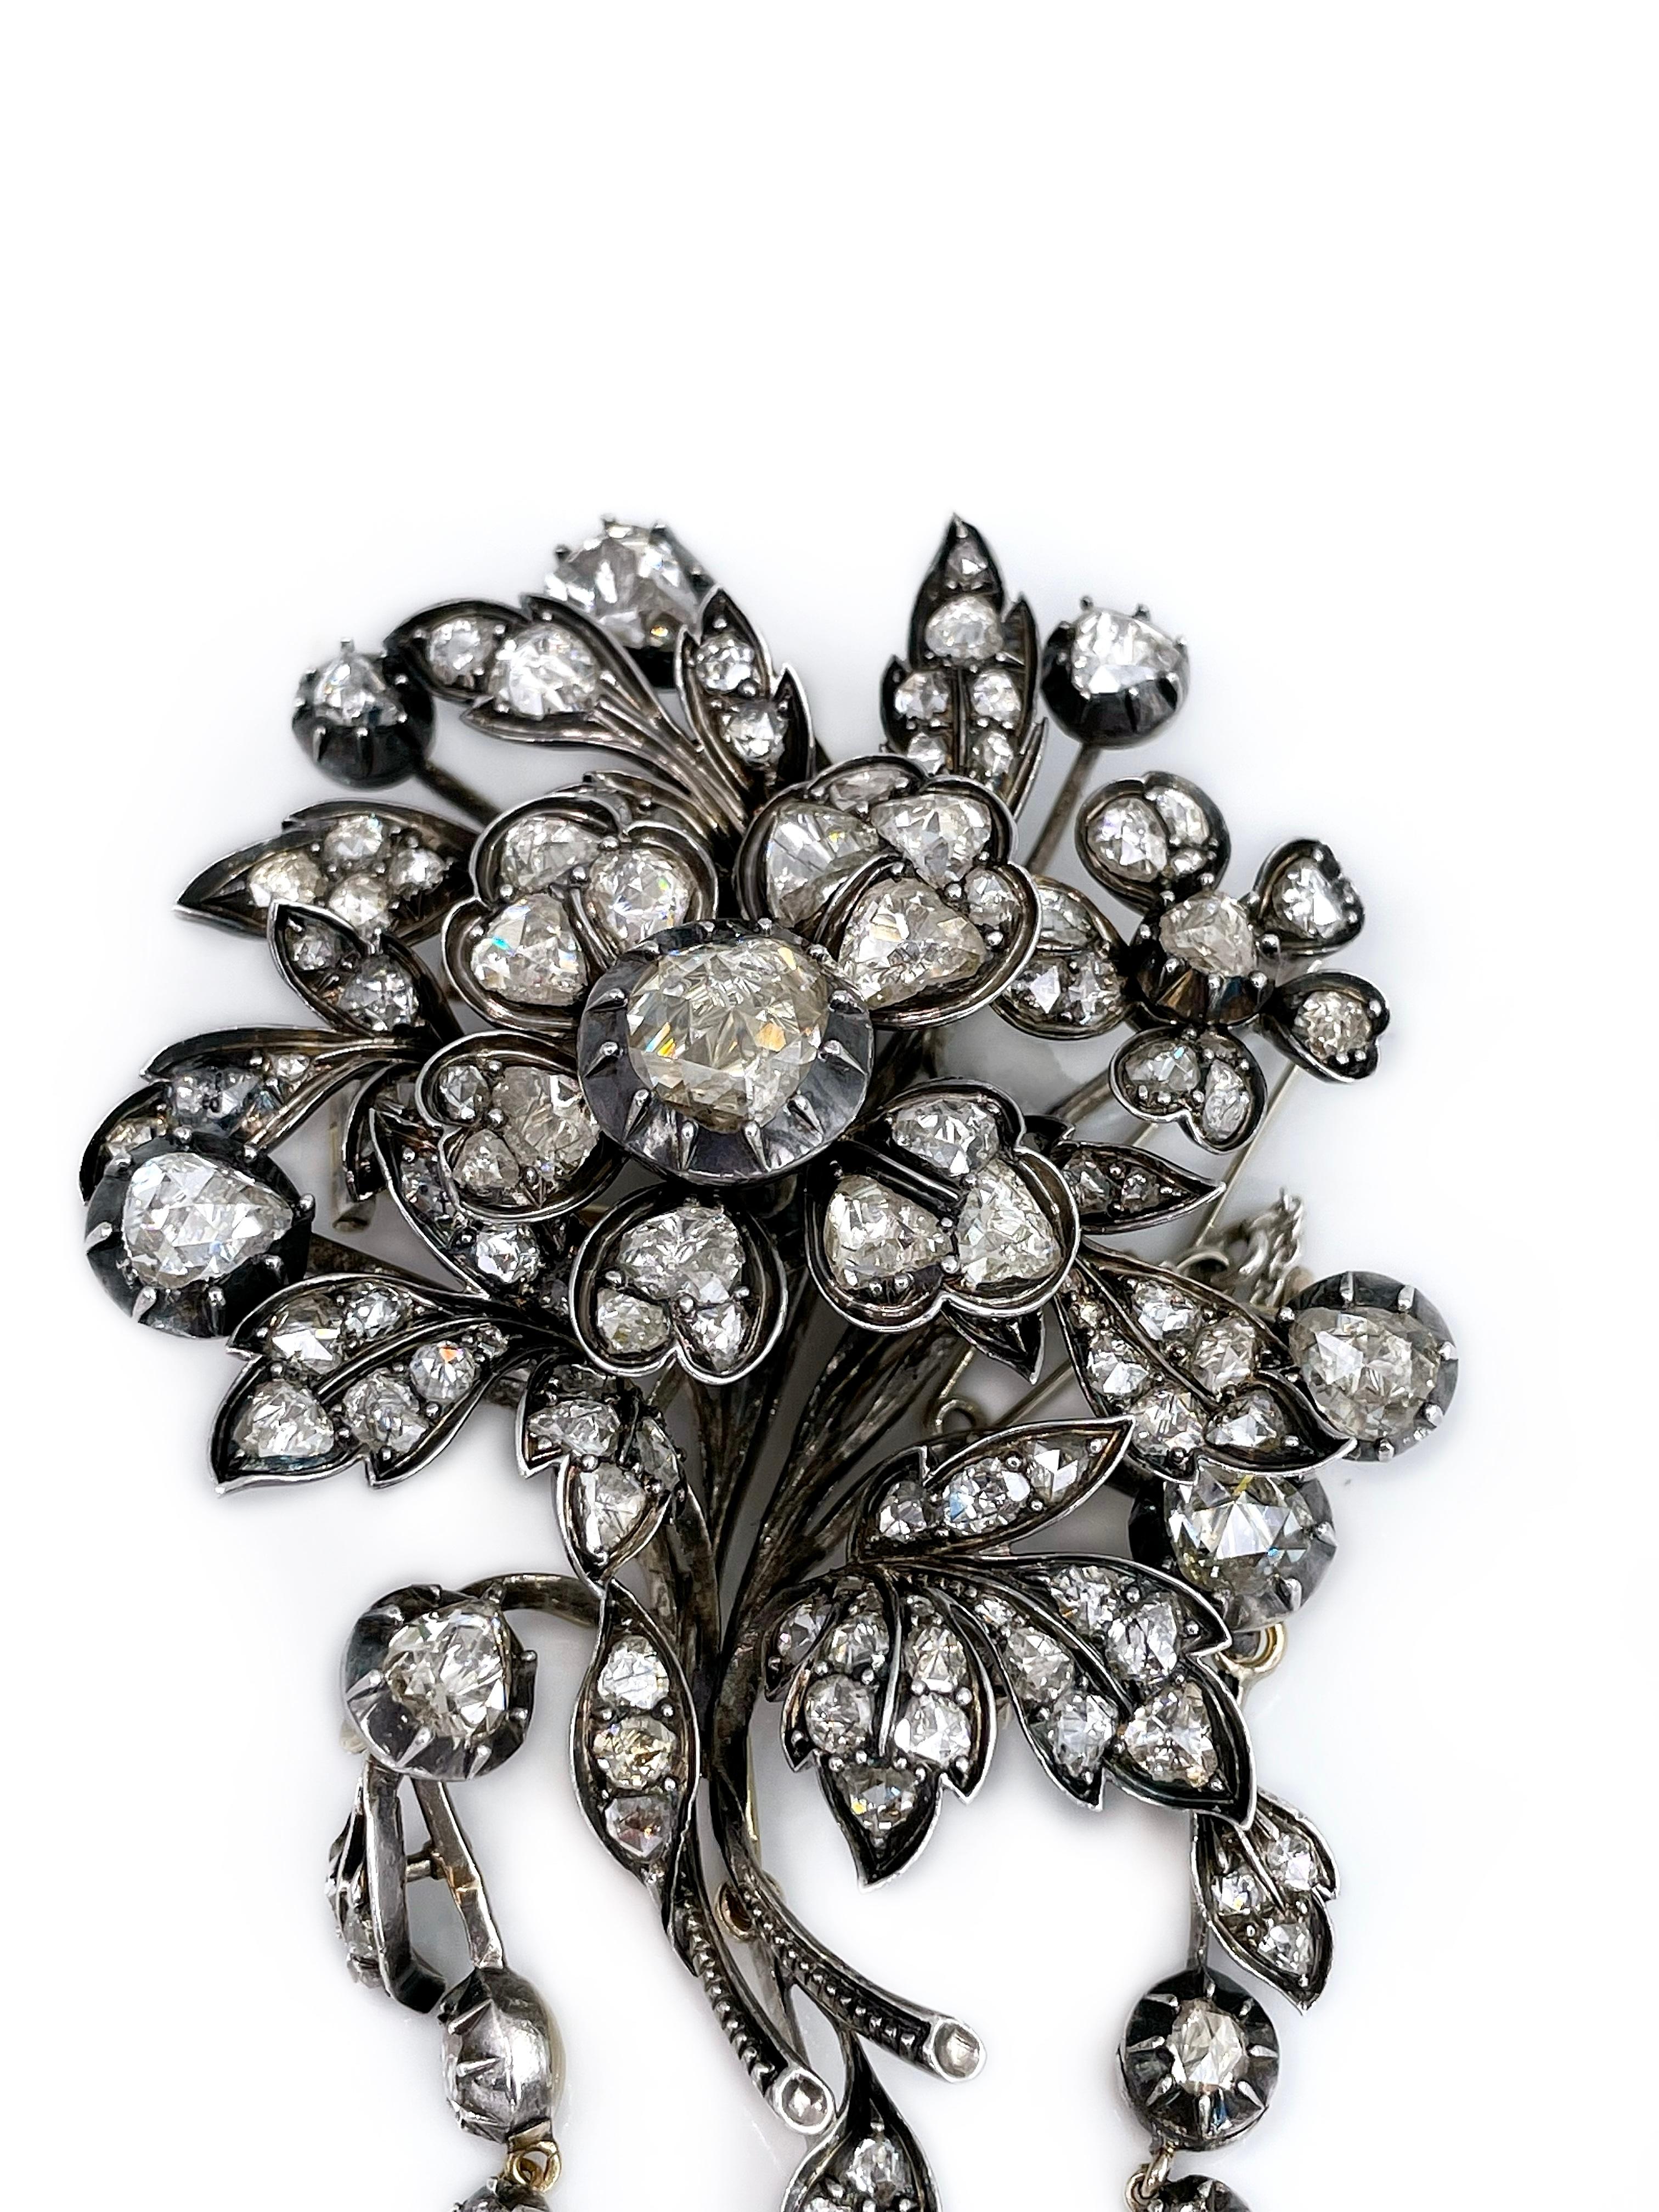 Certified Victorian Gold 11.70 Carat Diamond Tremblent Floral Corsage Pin Brooch For Sale 1